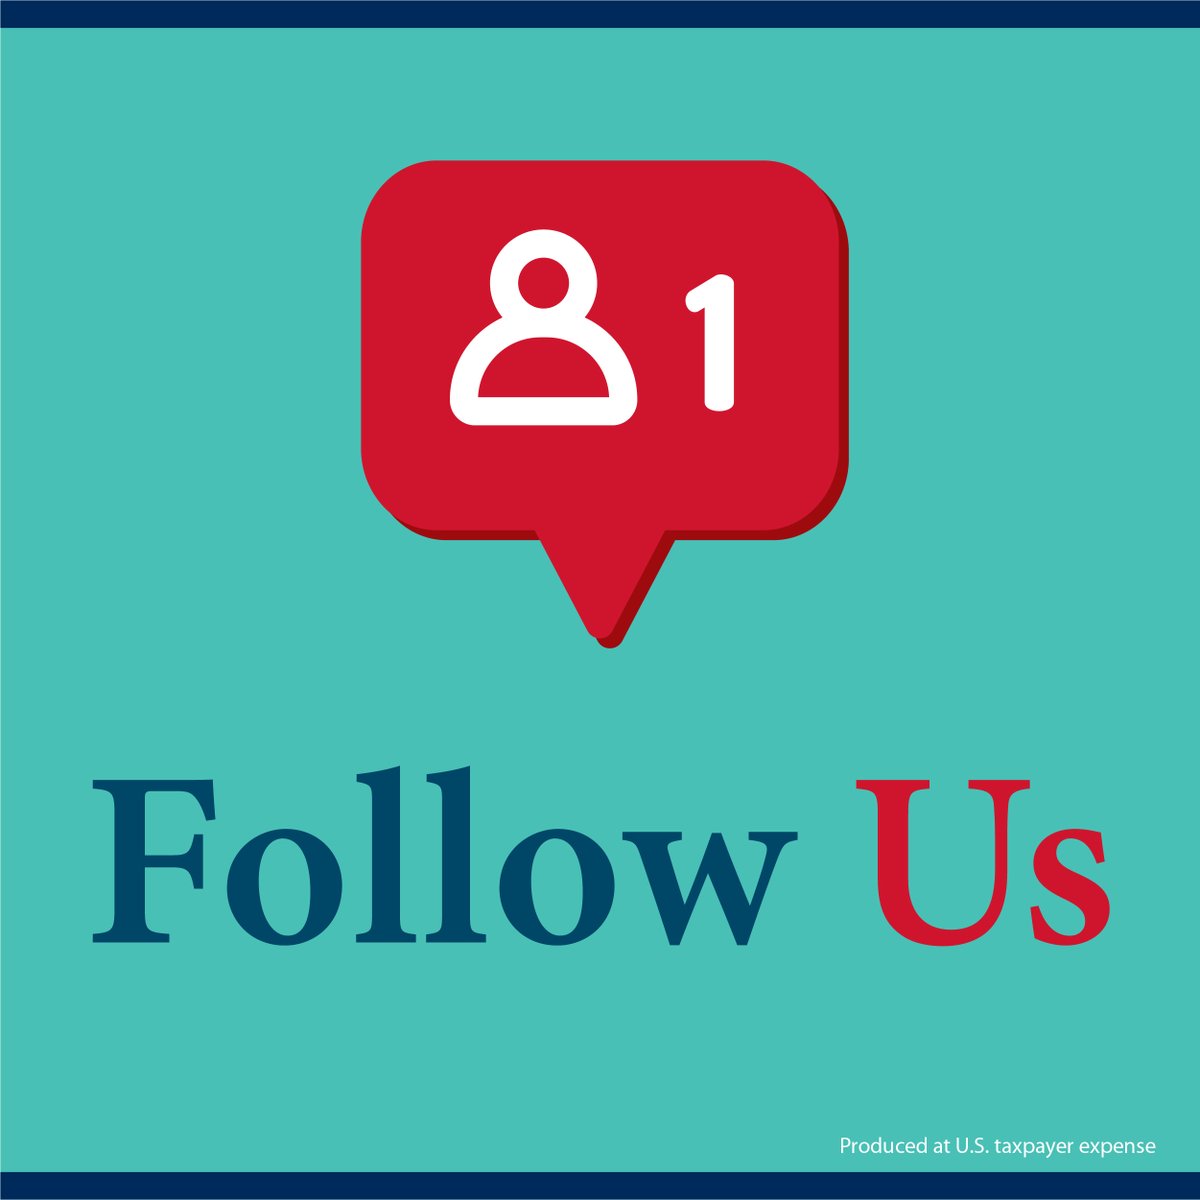 Want to stay informed? Give us a follow! Facebook: ow.ly/qXAy50PWuEU LinkedIn: ow.ly/rquq50PWuBH YouTube: ow.ly/V4c550PWuBJ Social Security Blog: ow.ly/Zuos50PWuBF Instagram: ow.ly/KJX350PWuBE #FF #FollowFriday